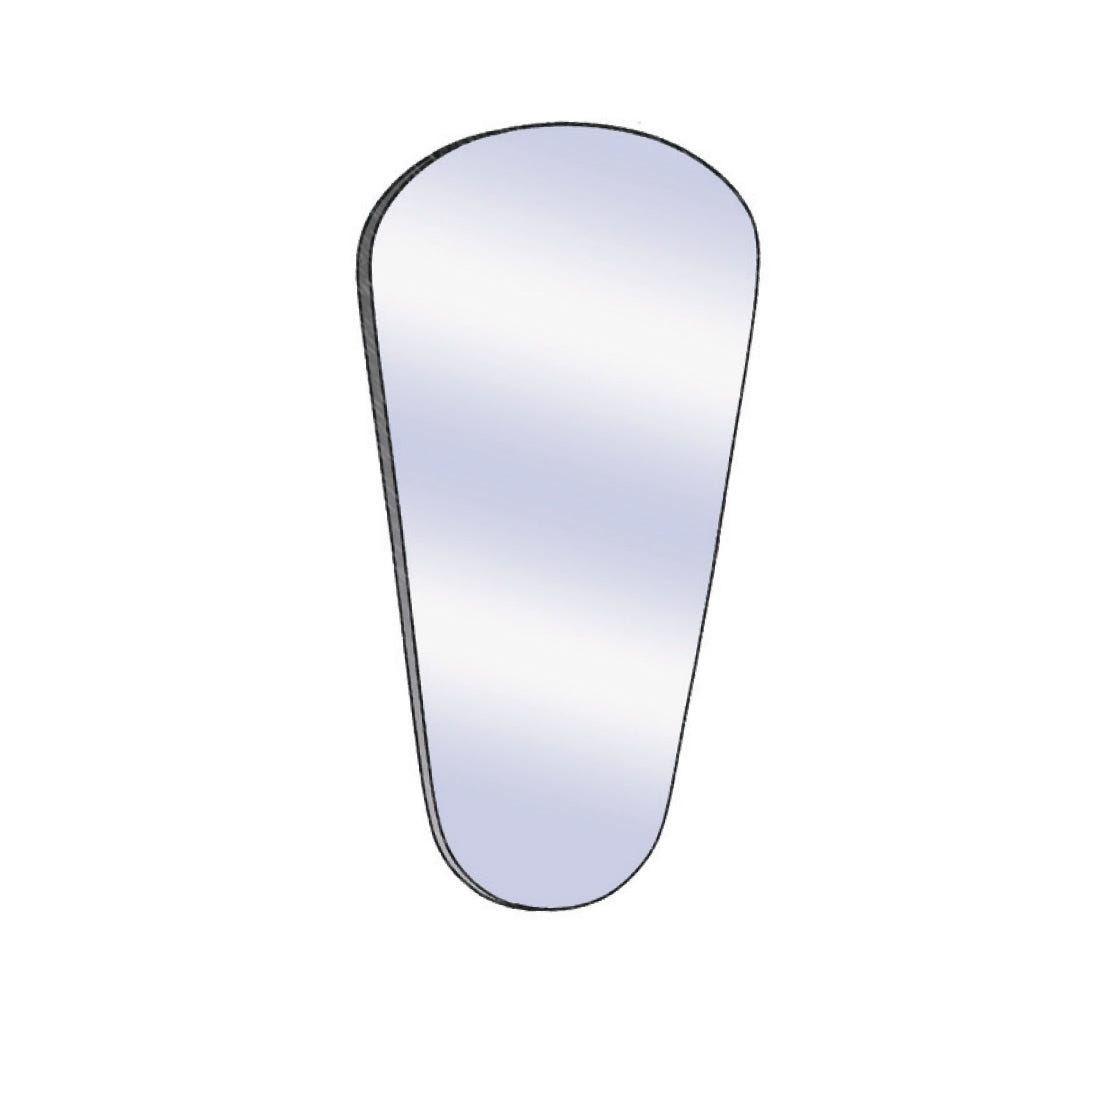 ACE Medium Buccal Intraoral Photo Mirror with malleable handle